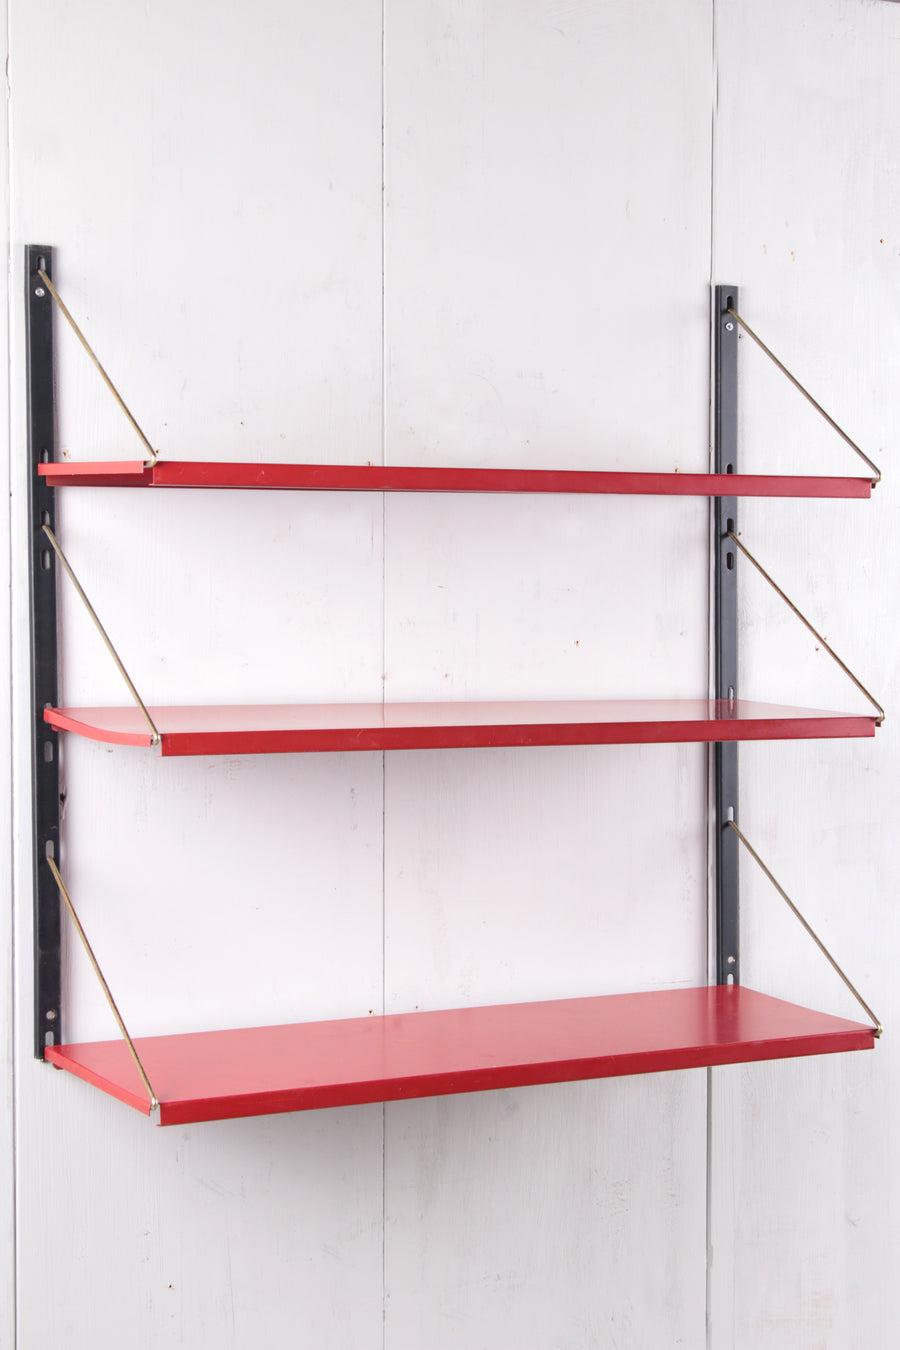 Pilastro Wall Hanging by Tjerk Reijenga, 1960s

Vintage metal wall system designed by Tjerk Reijenga for Pilastro Holland in the sixties.

The system consists of two wall parts, a black perforated metal rack and three shelves.

The condition is